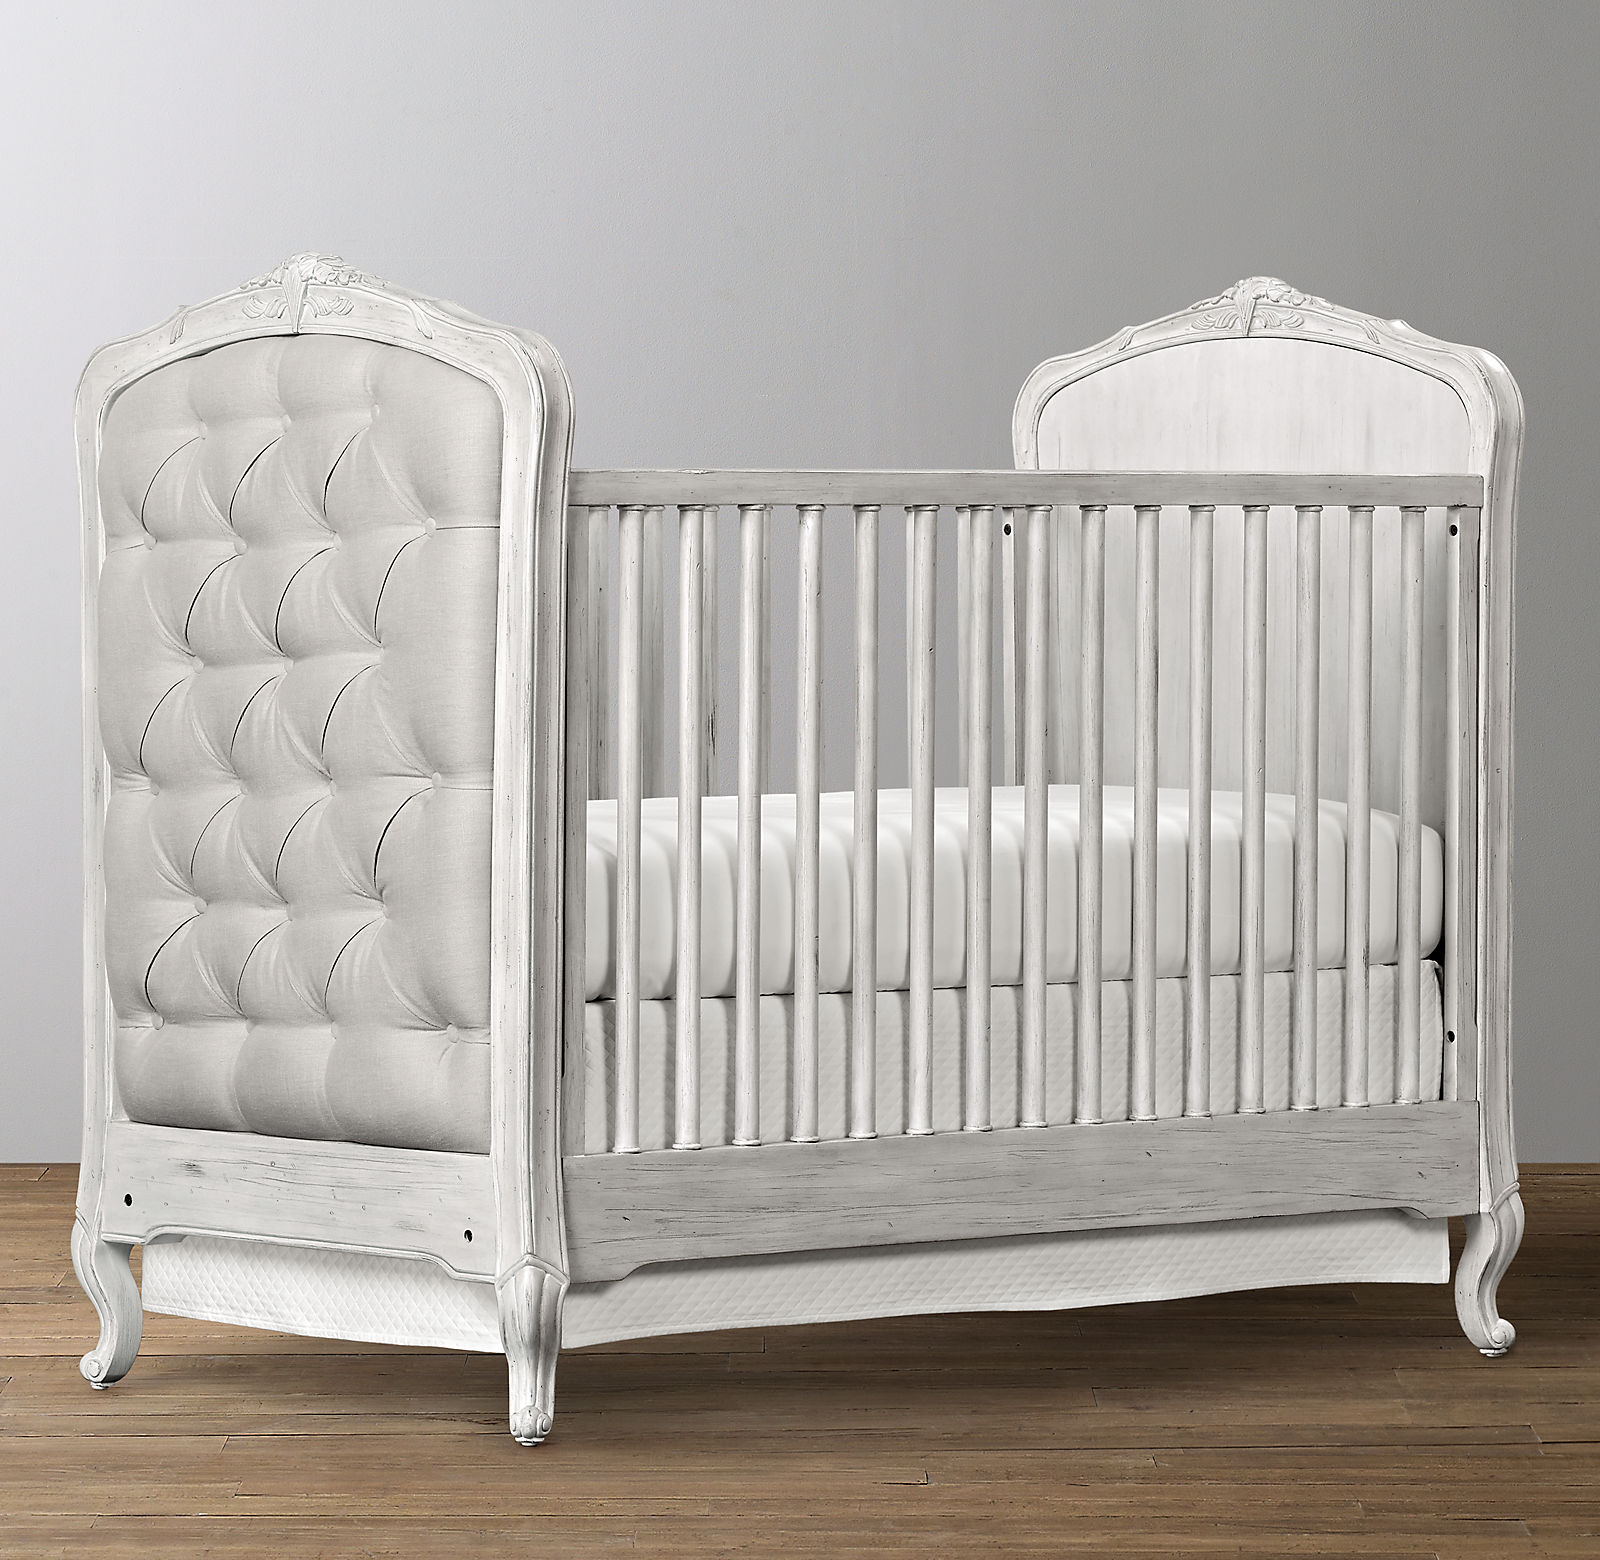 Shop COLETTE TUFTED CRIB - AGED WHITE from Restoration Hardware on Openhaus